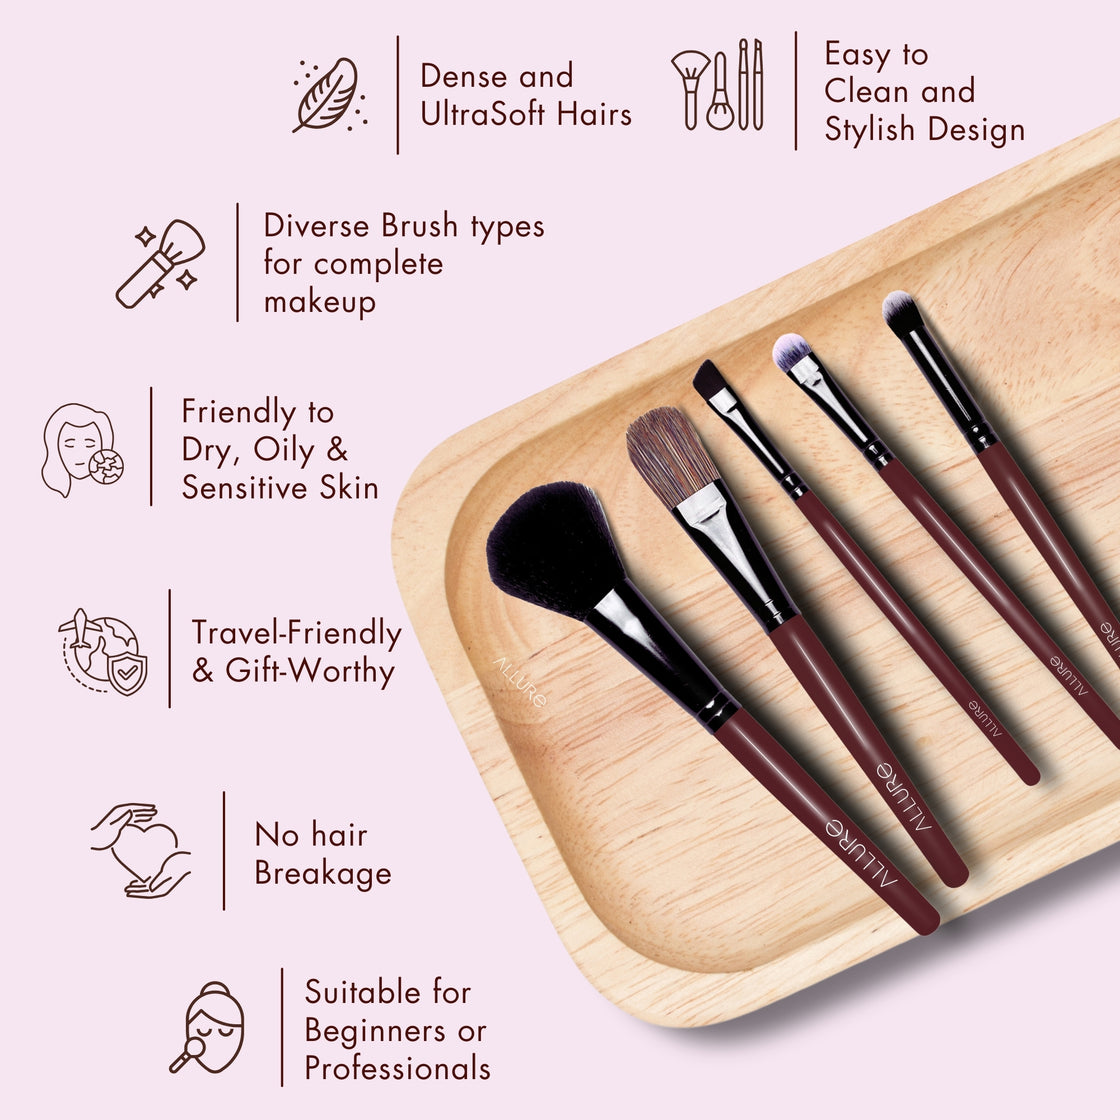 Allure Set Of 5 Makeup Brushes (MBS -C5)